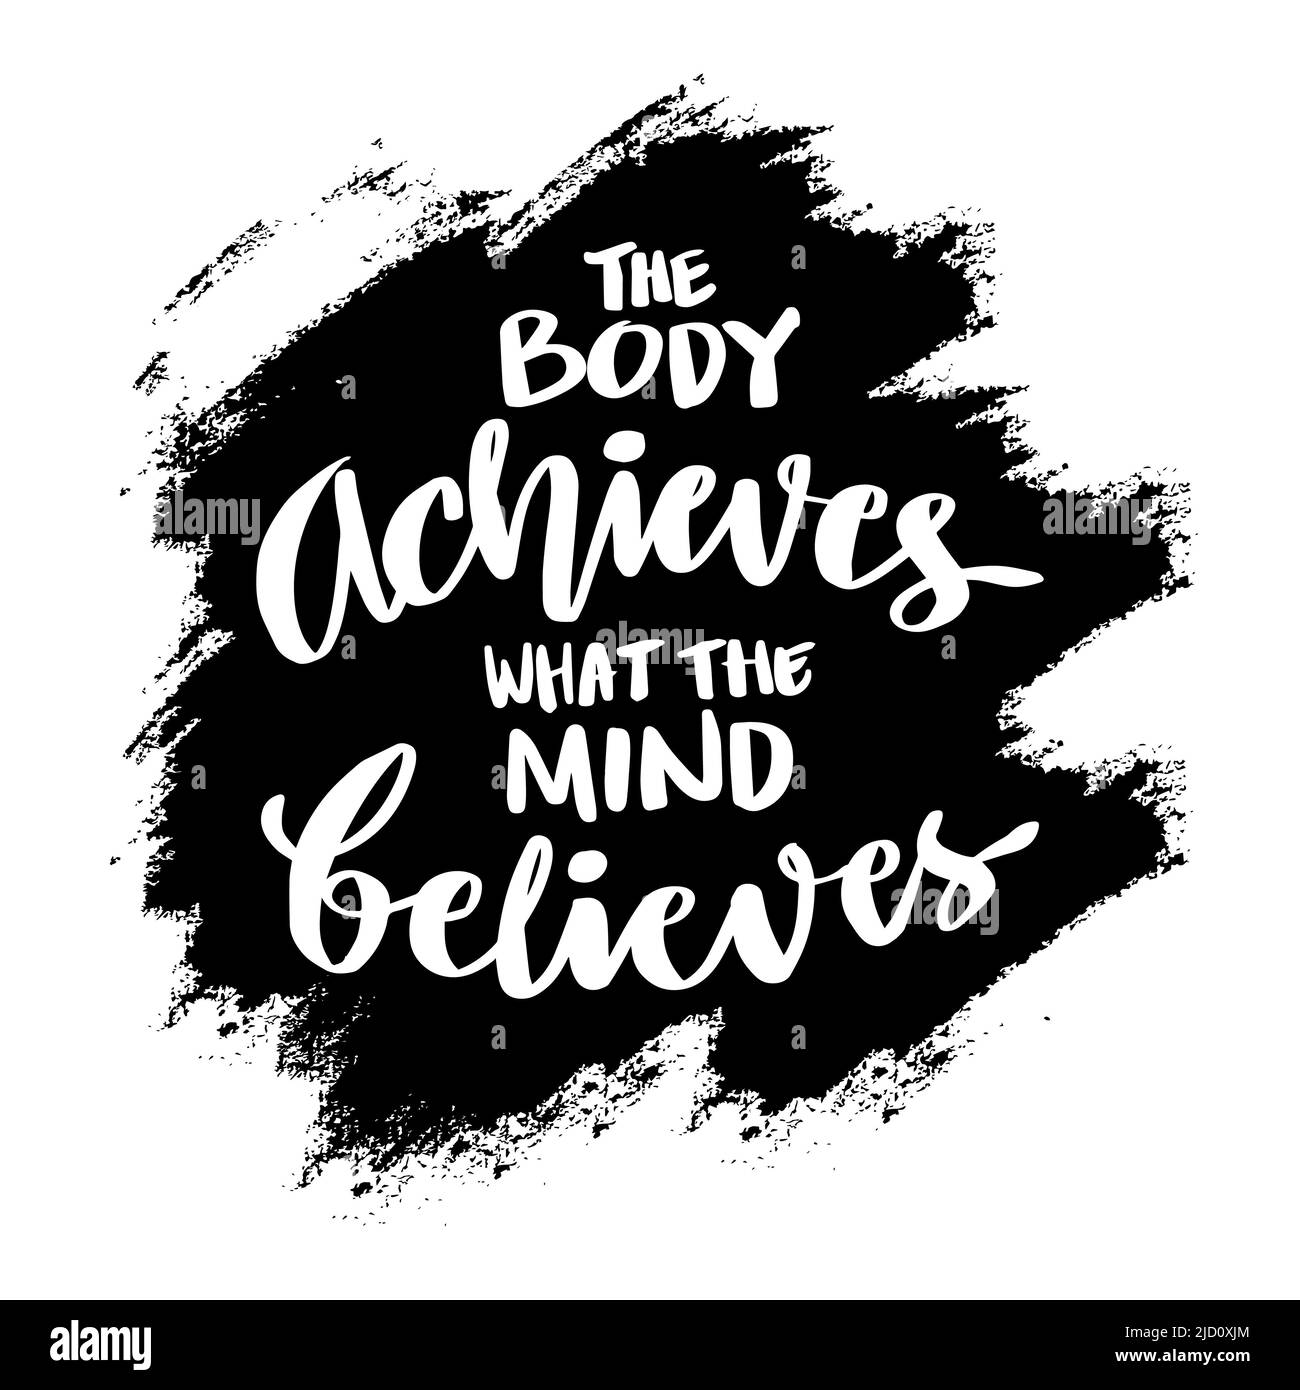 The body achieves what the mind believes. Poster quotes. Stock Photo